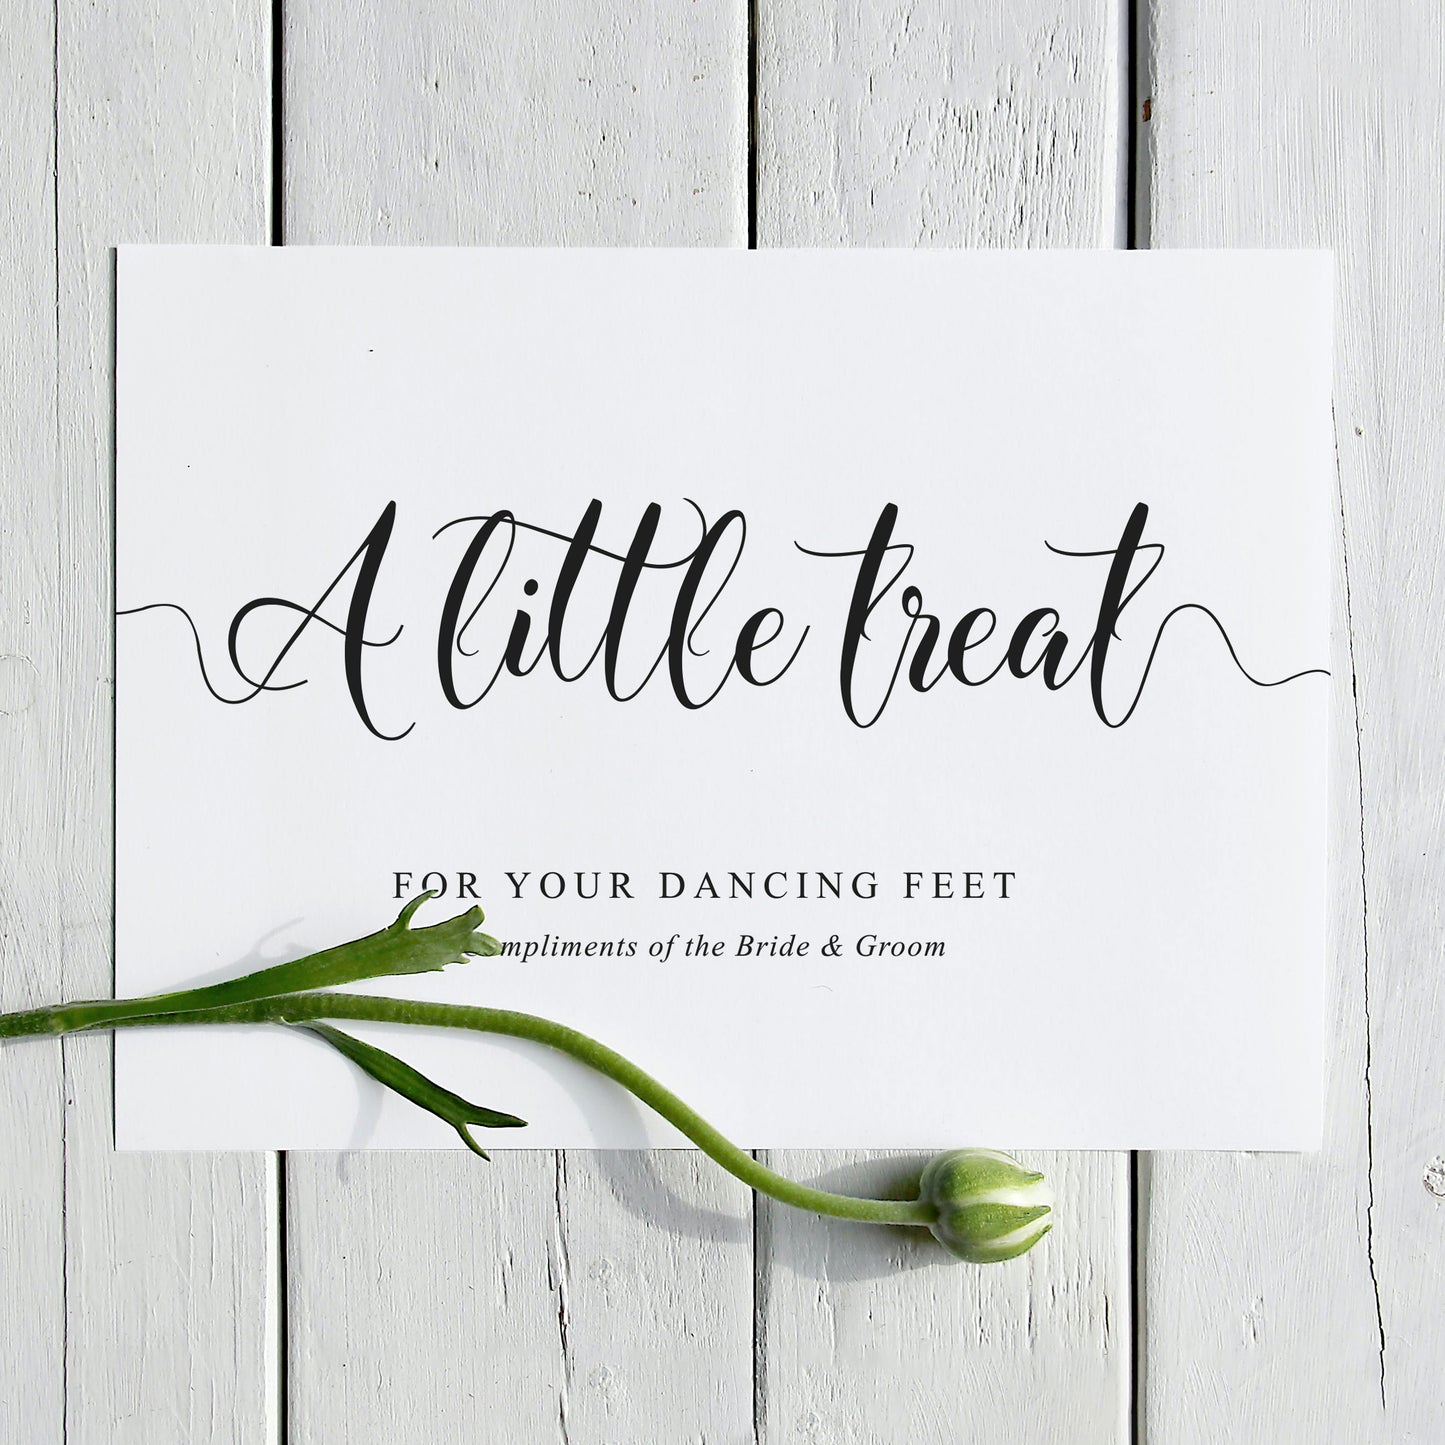 8"x10" a little treat for your dancing feet sign